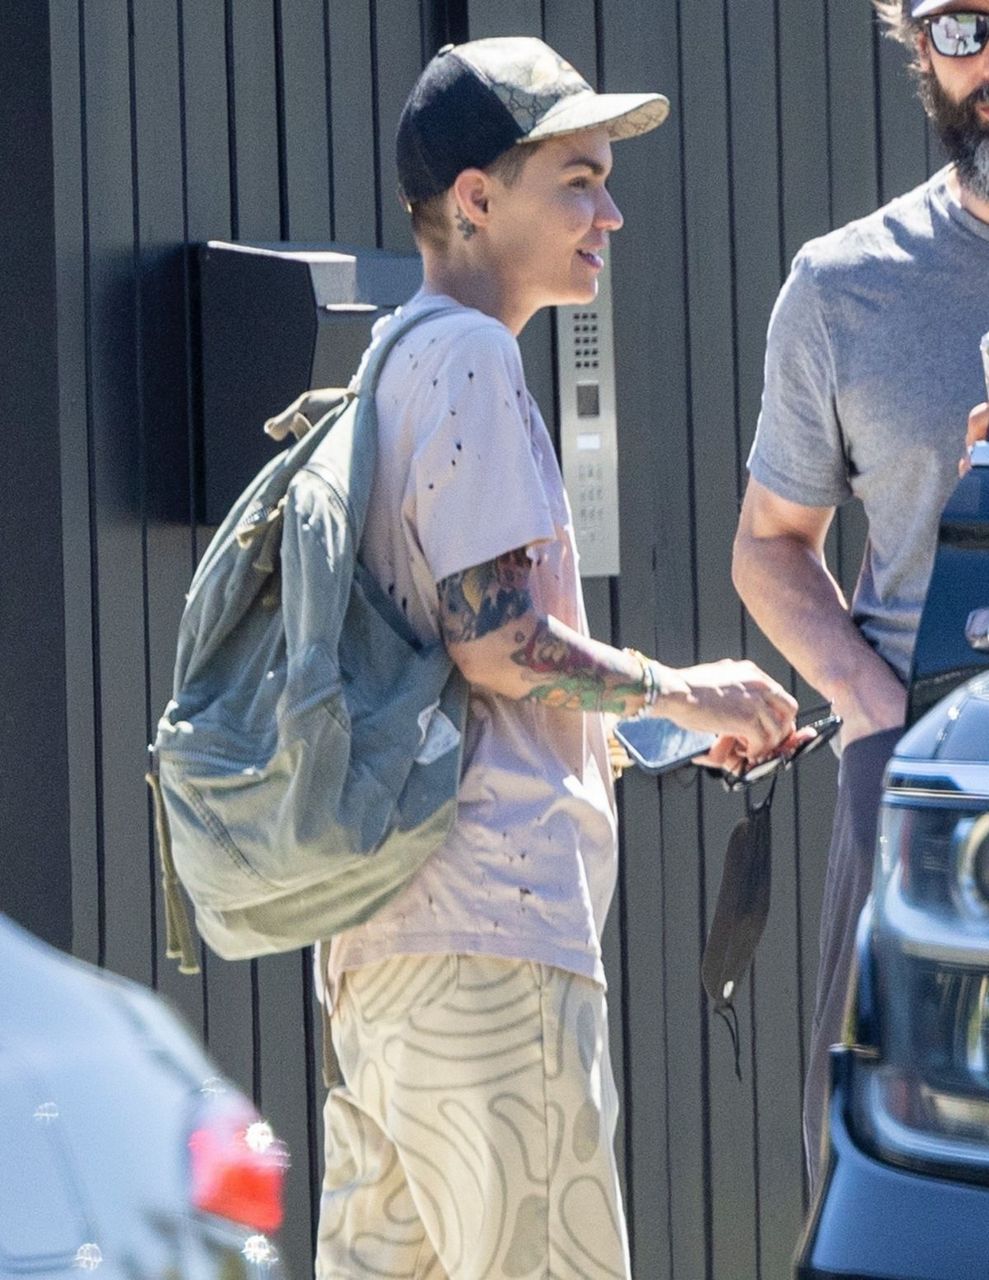 Ruby Rose Getting Picked Up By Limo Los Angeles